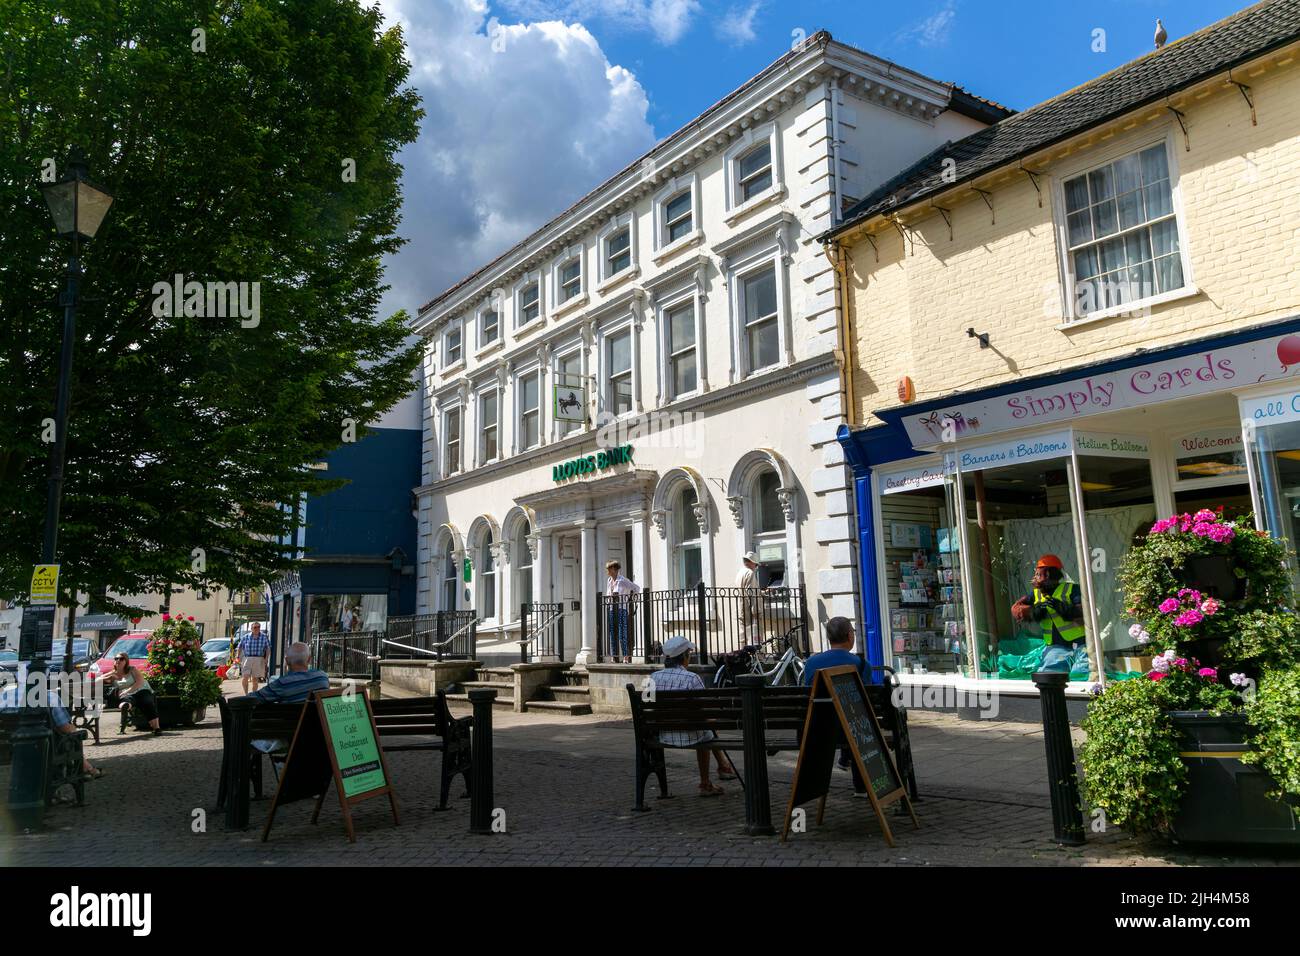 Branch of Lloyds bank in historic building in town centre, Beccles, Suffolk, England, UK Stock Photo